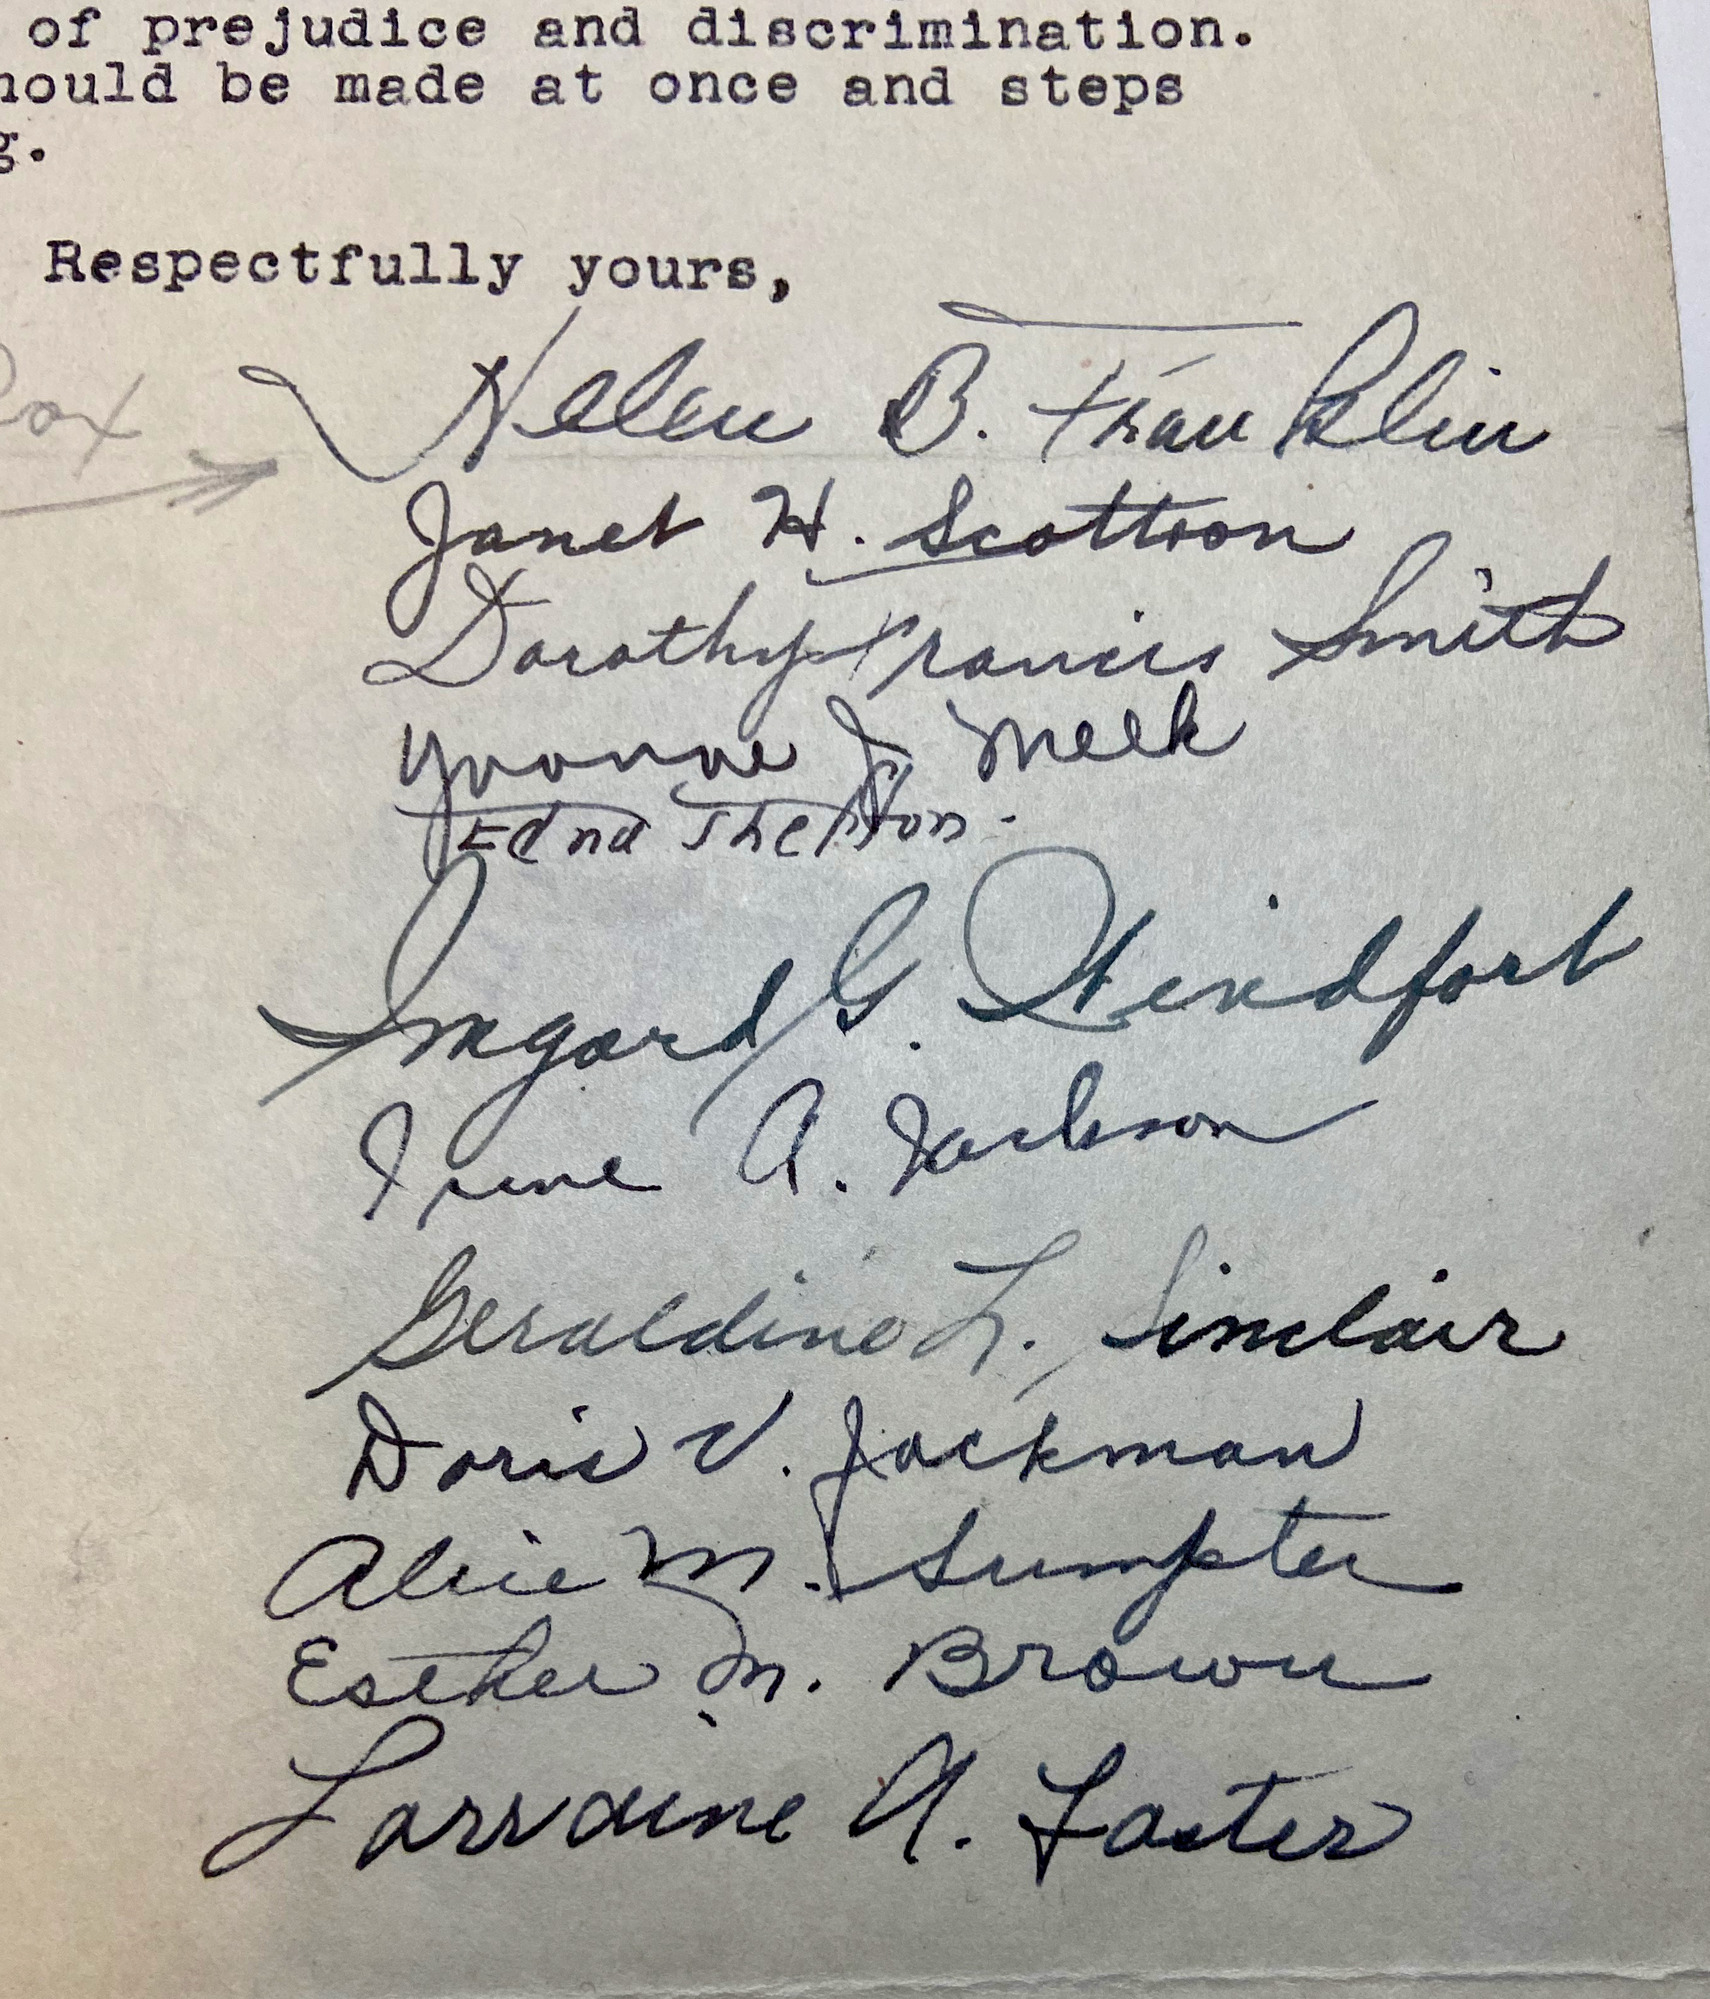 List of Helen Franklin and 11 other women's signatures on a letter regarding discrimination at the Navy Yard.